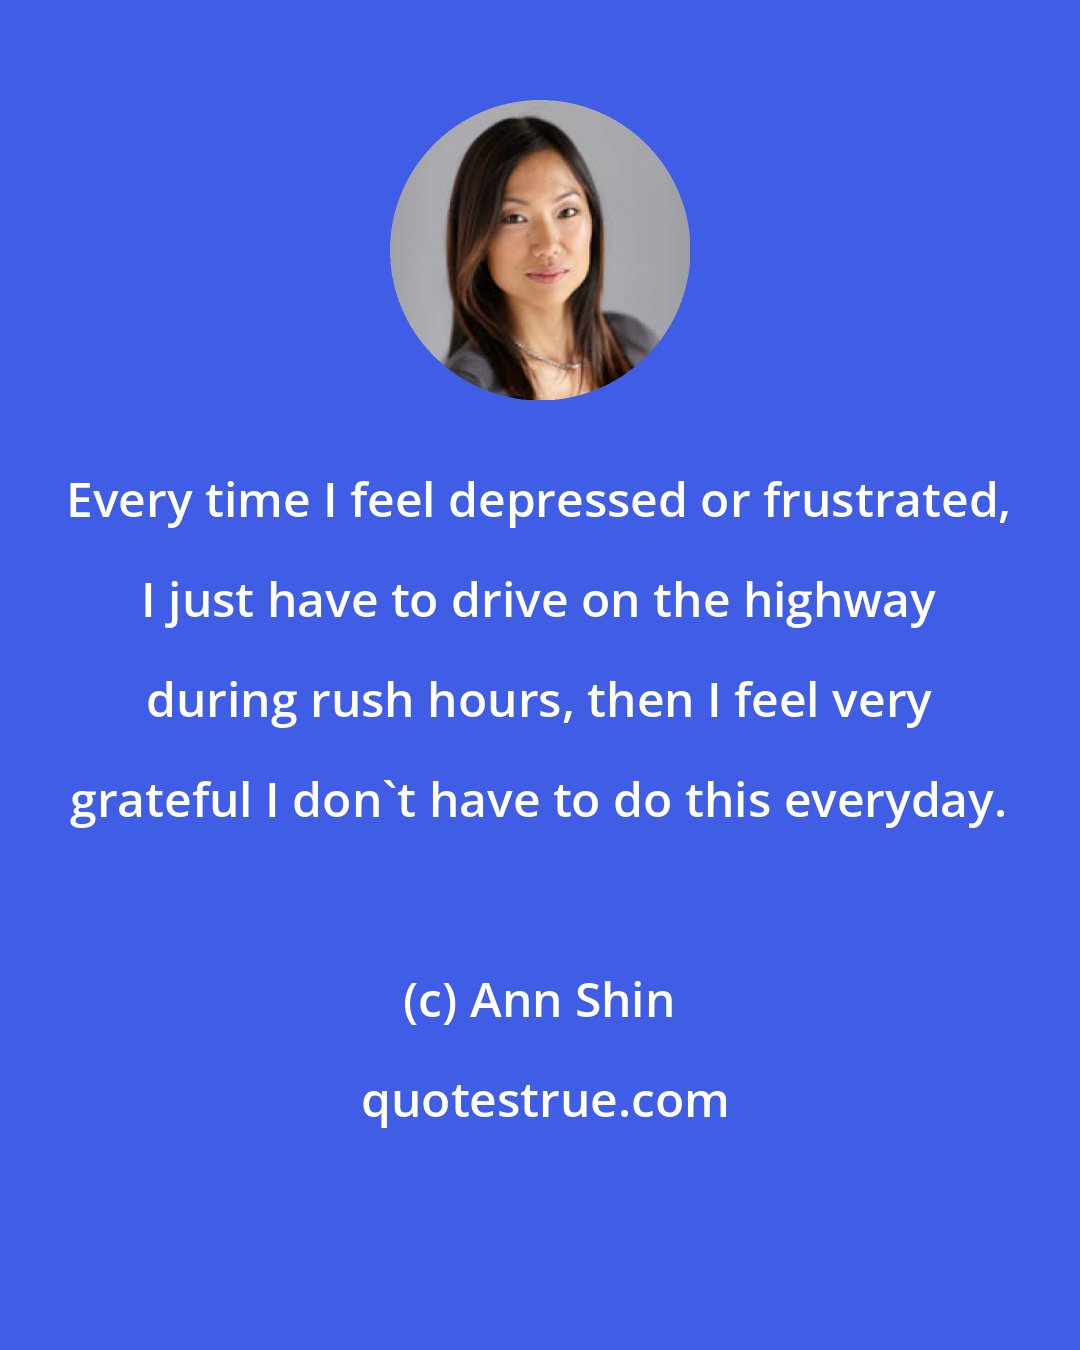 Ann Shin: Every time I feel depressed or frustrated, I just have to drive on the highway during rush hours, then I feel very grateful I don't have to do this everyday.